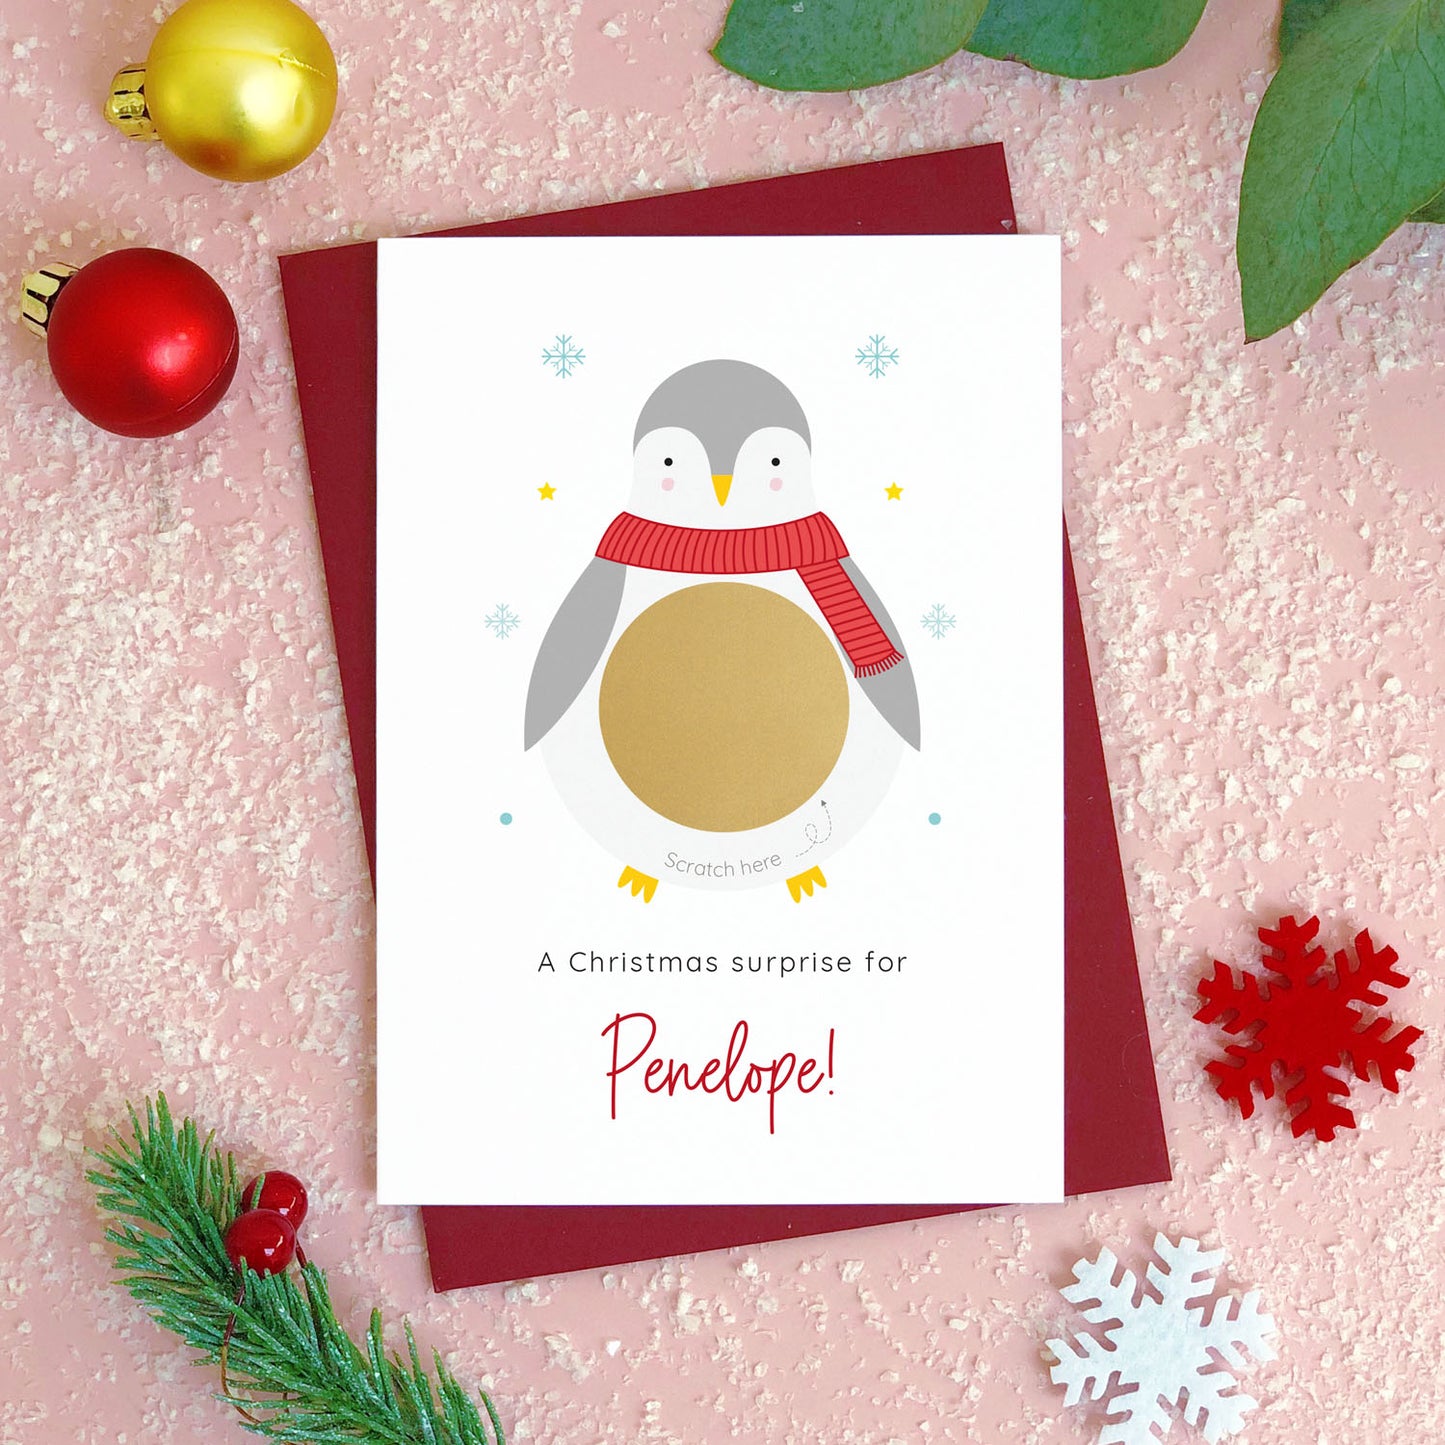 A personalised penguin Christmas scratch card photographed flat lying on a red wine coloured envelope on a pink surface surrounded by fake snow, baubles and foliage. The gold panel has not yet been scratched off to reveal the custom message.